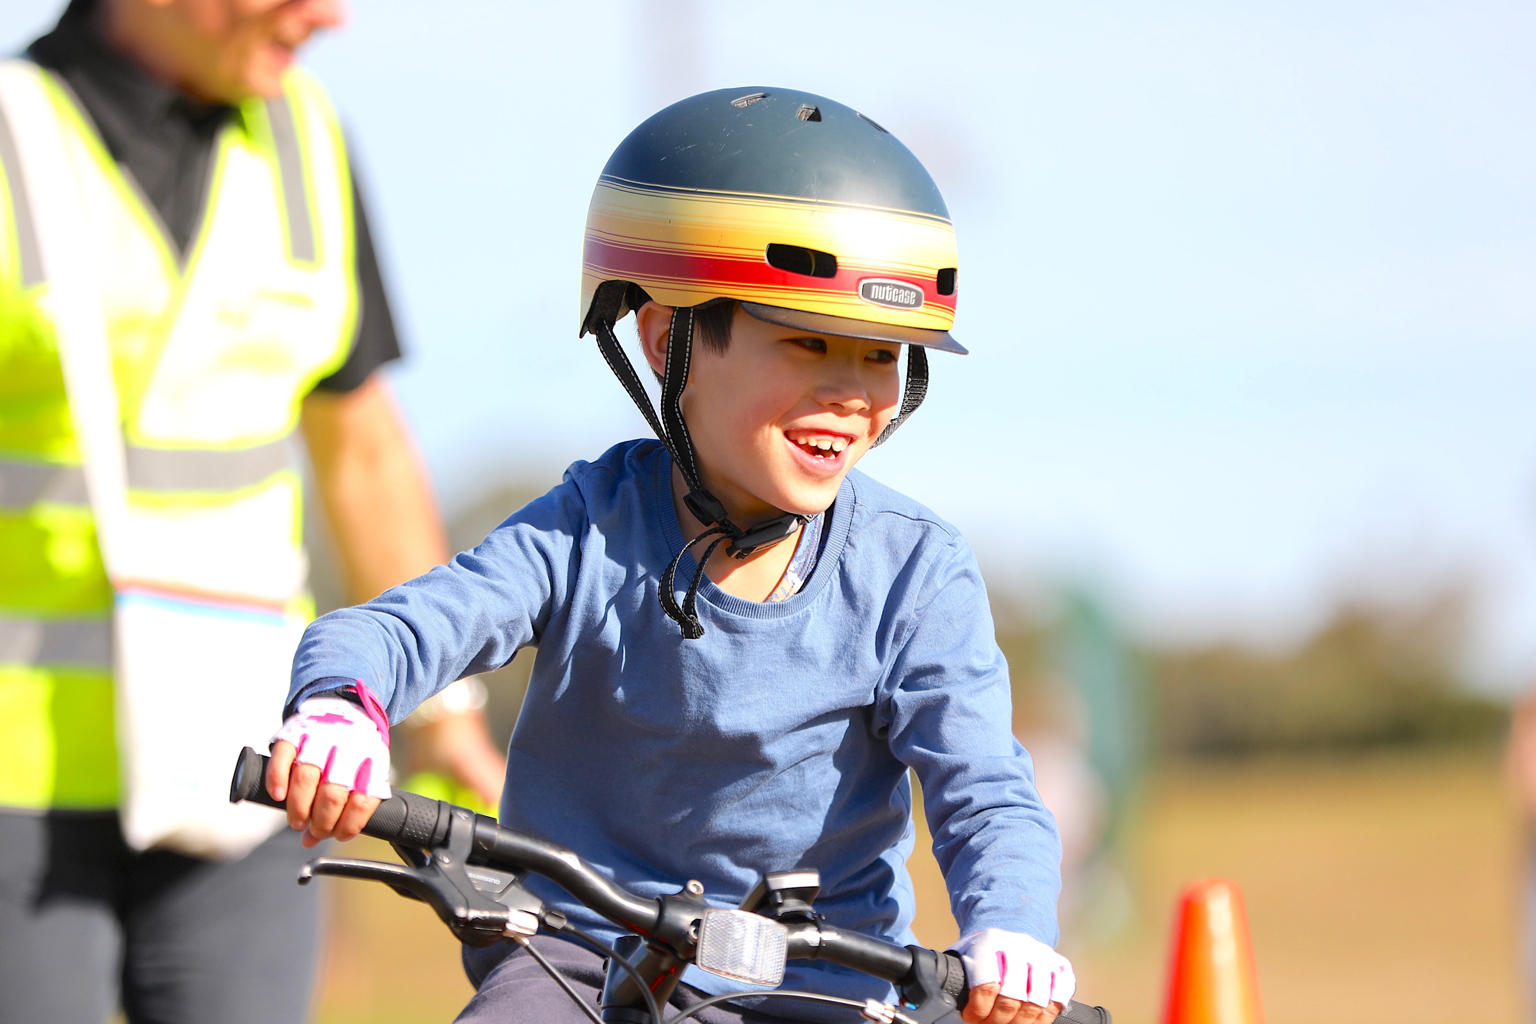 A young boy wearing a bicycle helmet while riding a bike. A man wearing a bright safety vest in the background.